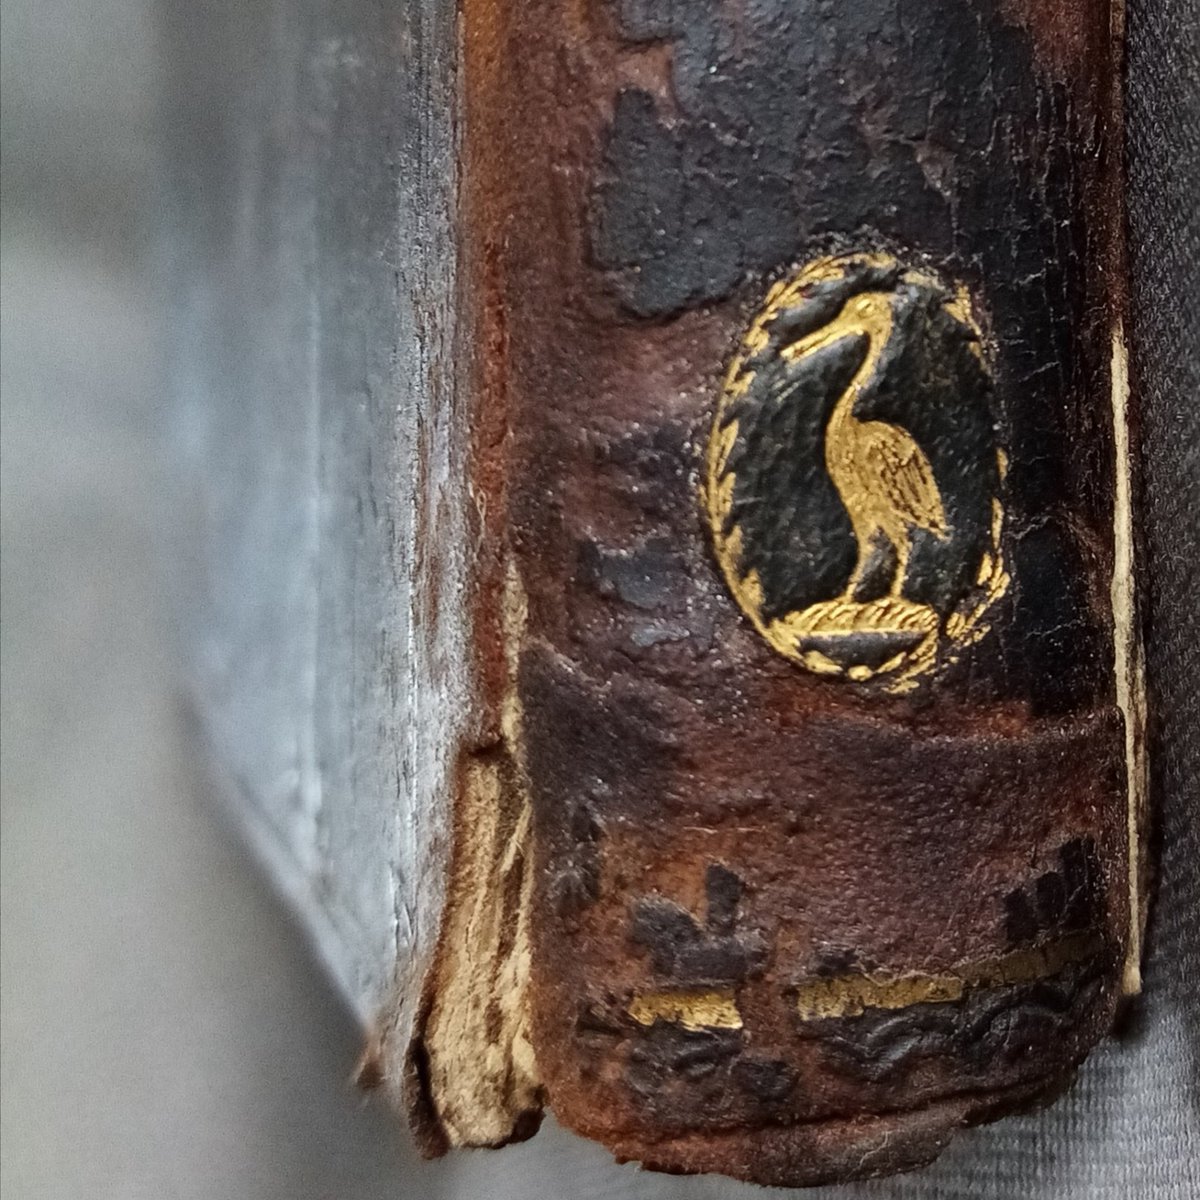 A gold heron perched on the spine of a book from 1659 #RareBooks #Bindings